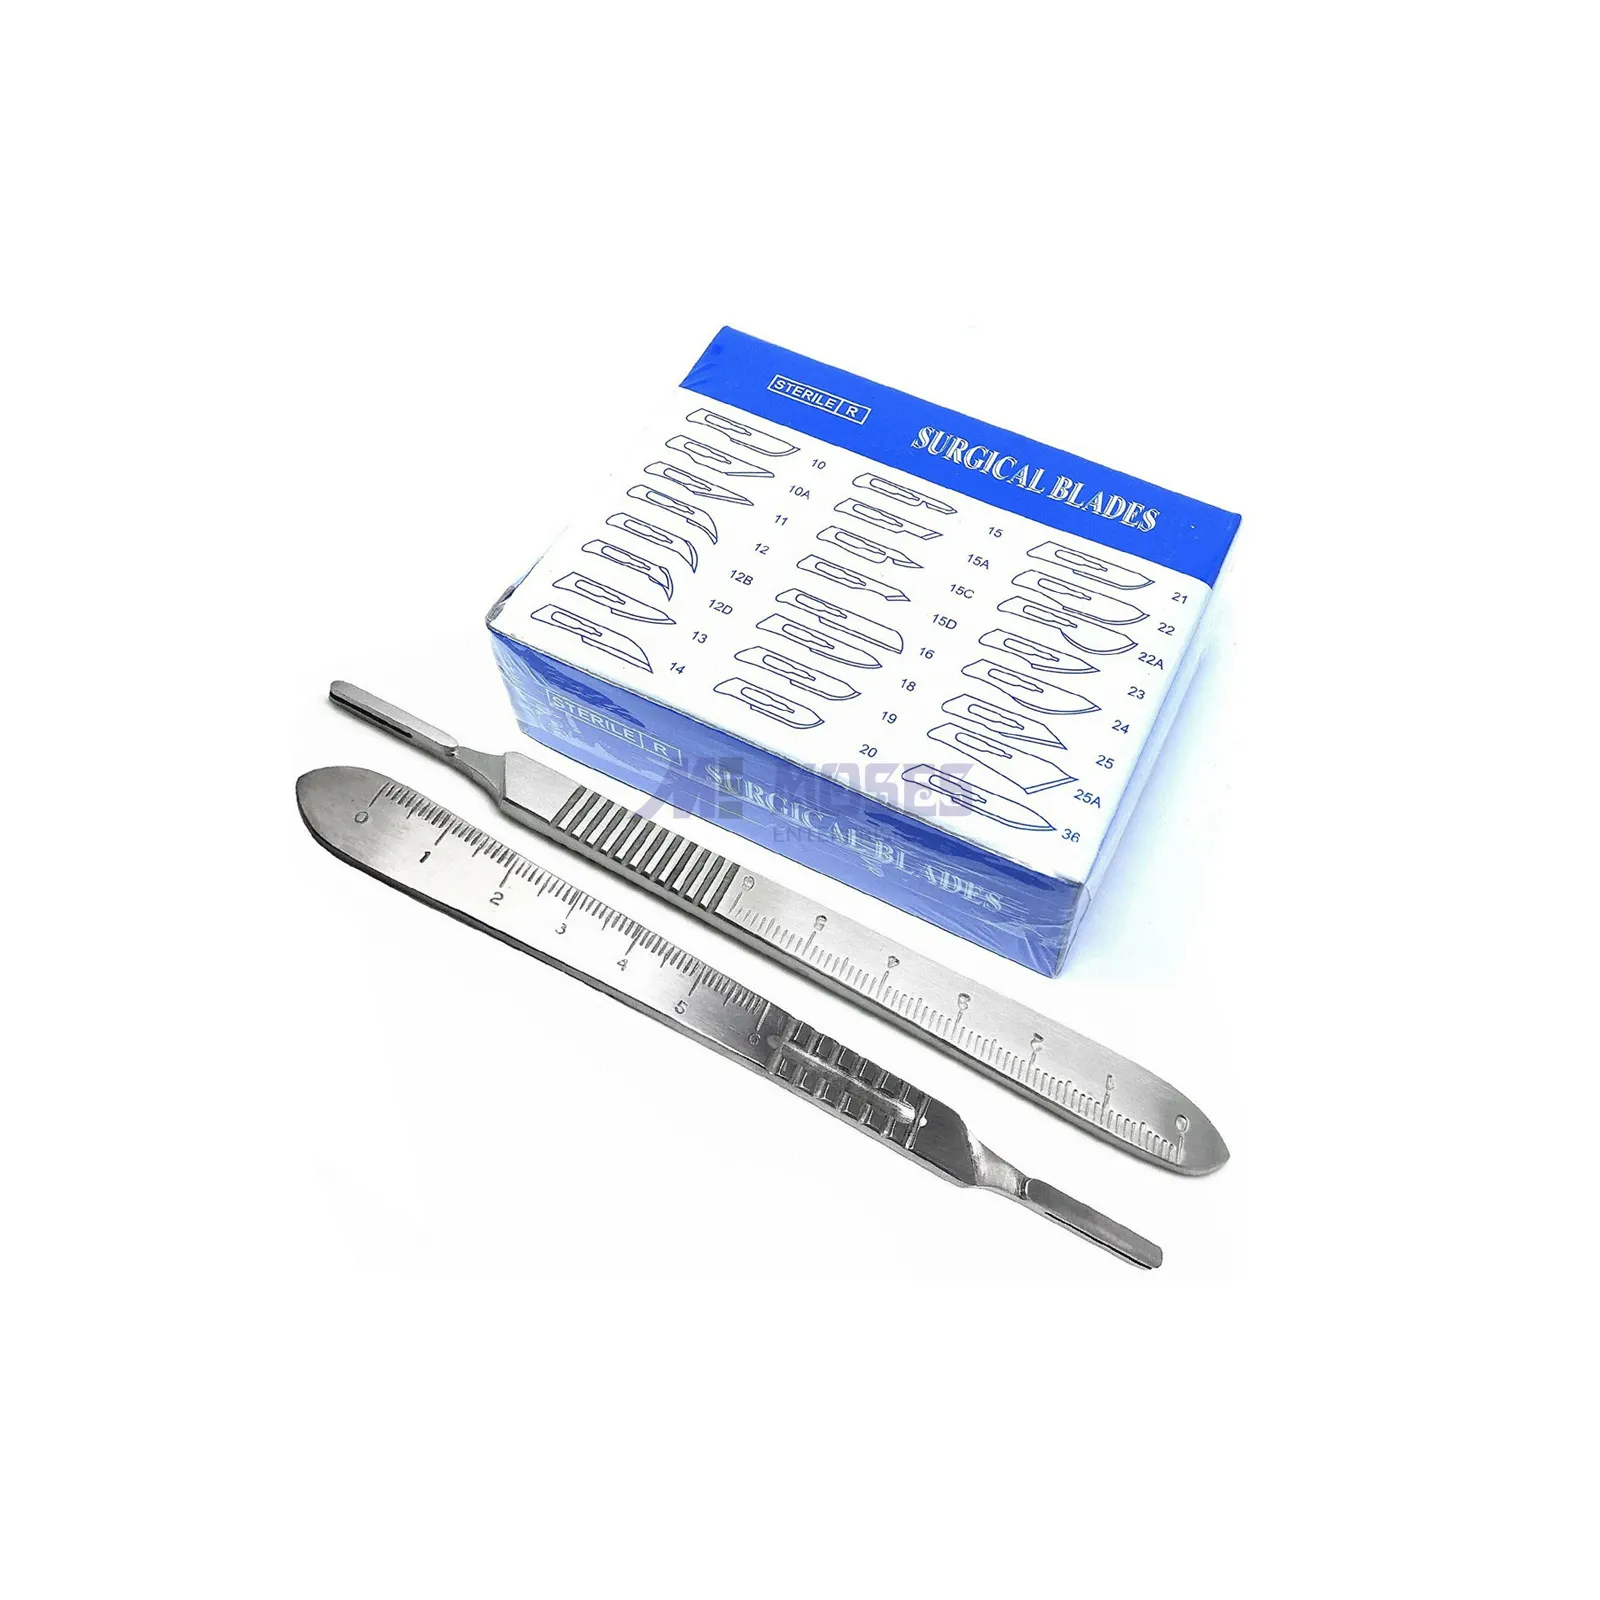 100 Pieces Scalpel Box Sterile Surgical Blades with FREE Scalpel BP Knife Handle Medical Dental Tools